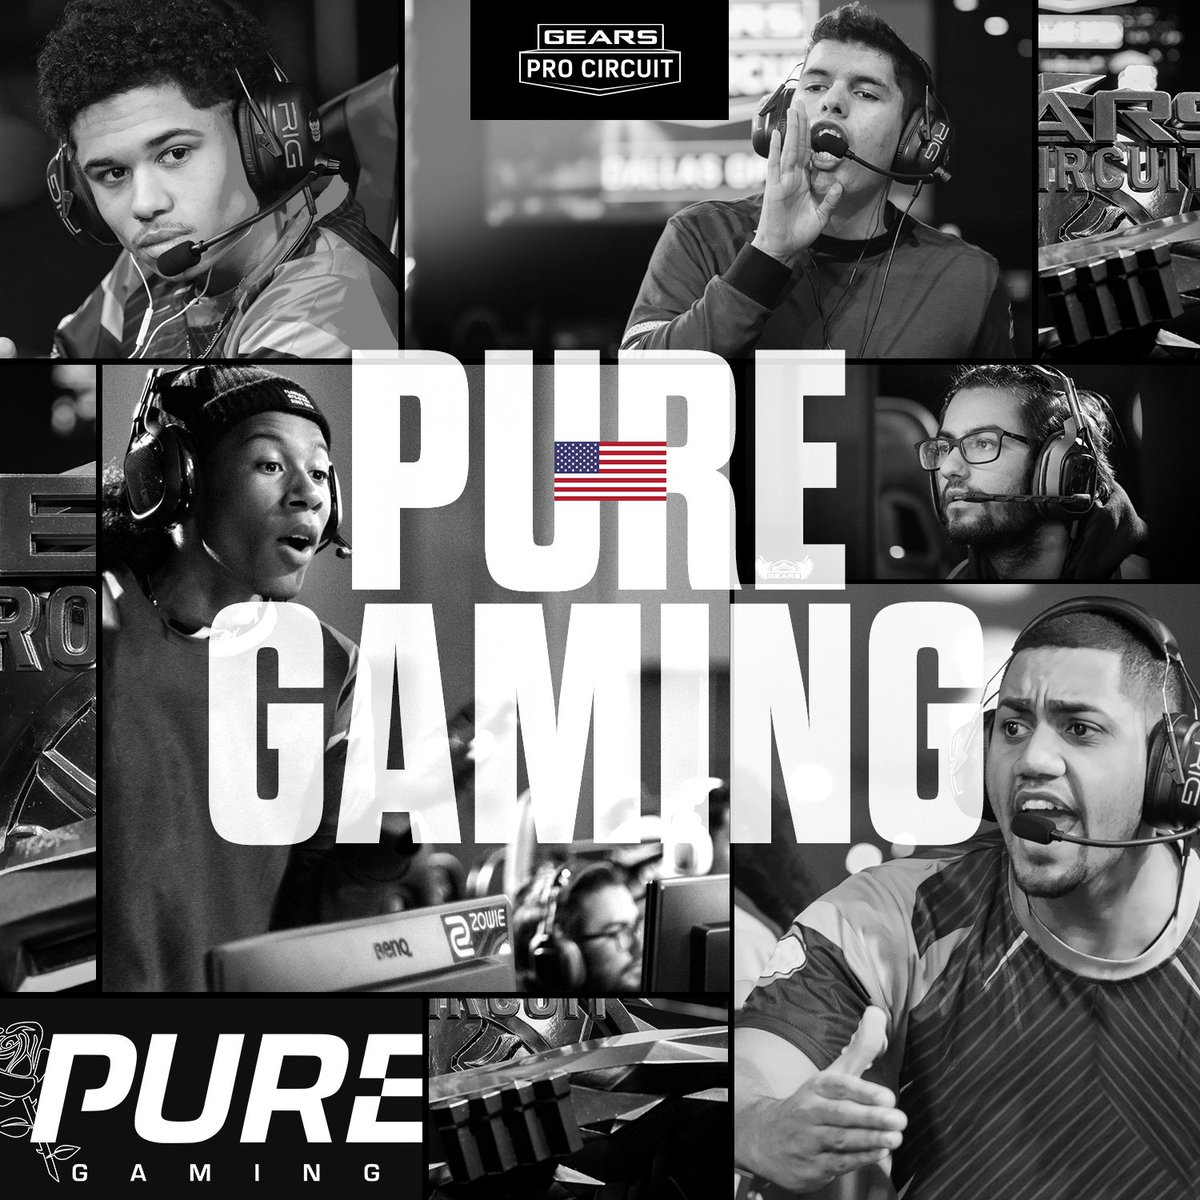 Up next on main stage it's the Dallas Champions, @OpTicGaming, taking on StayPureGG. Can OpTic finish the day with a flawless record? Can the underdogs, Pure, pull off a memorable Pool Play upset? Do not miss out on this one, LIVE on: live.gearsofwar.com